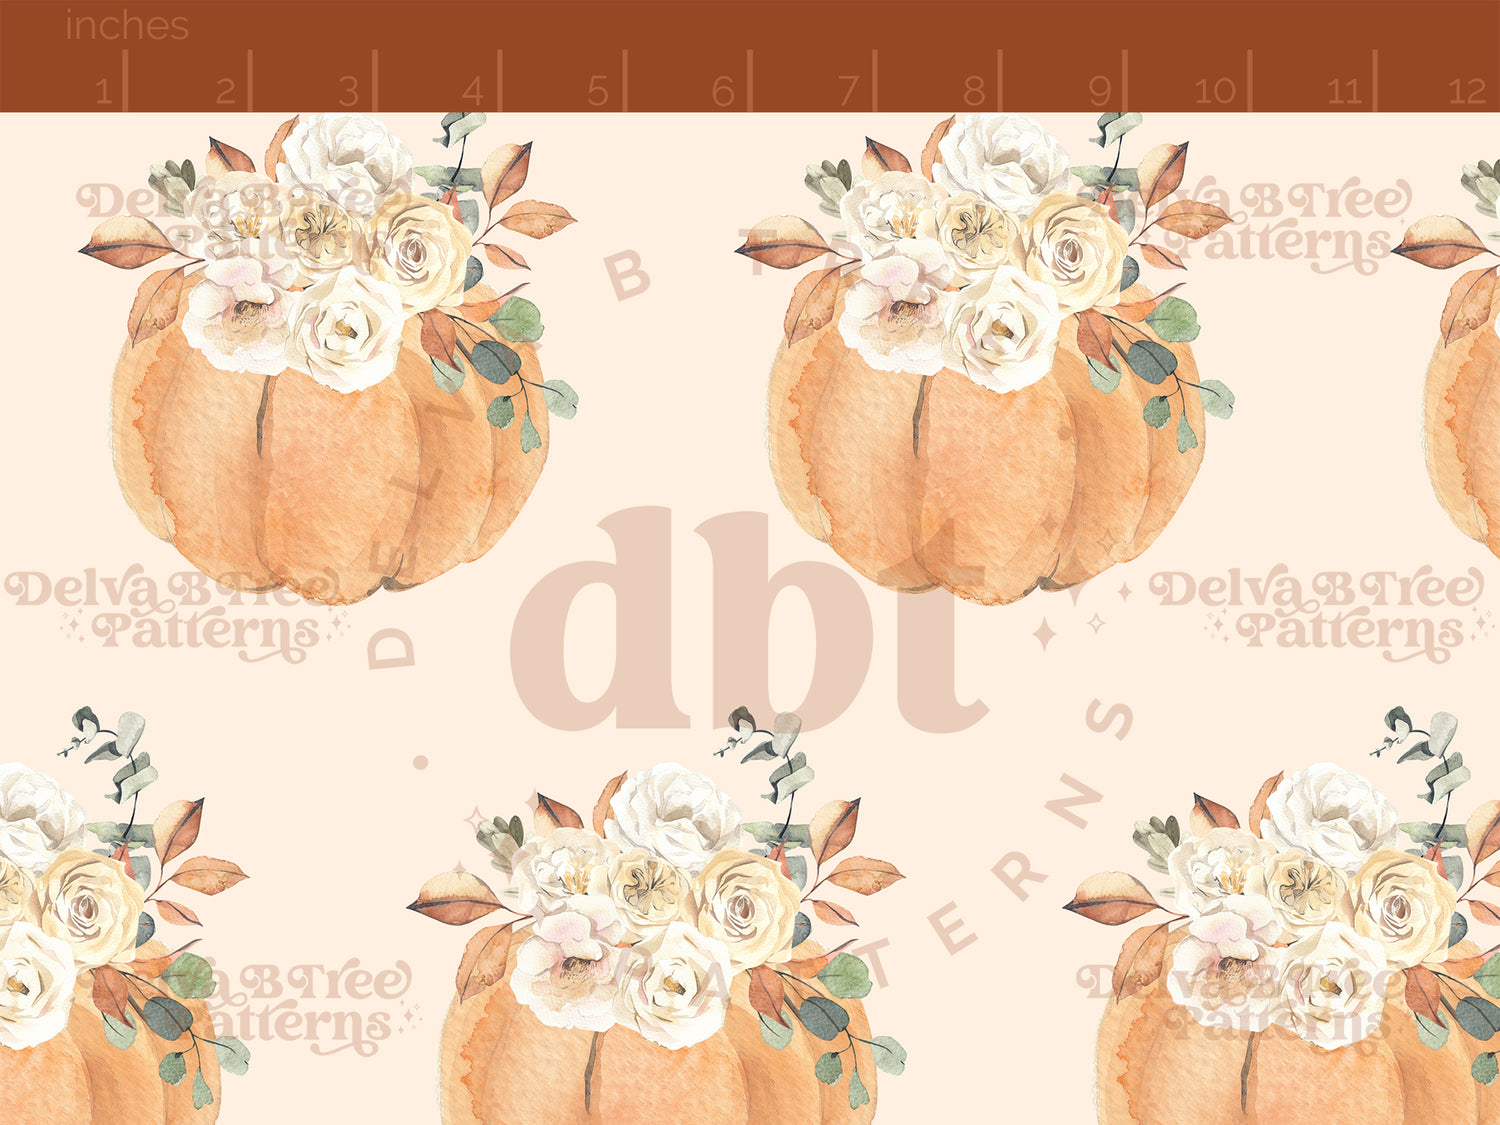 Watercolor orange pumpkins, flowers and leaves on a pale light orange seamless pattern scale, digital file for small shops that make handmade products in small batches.